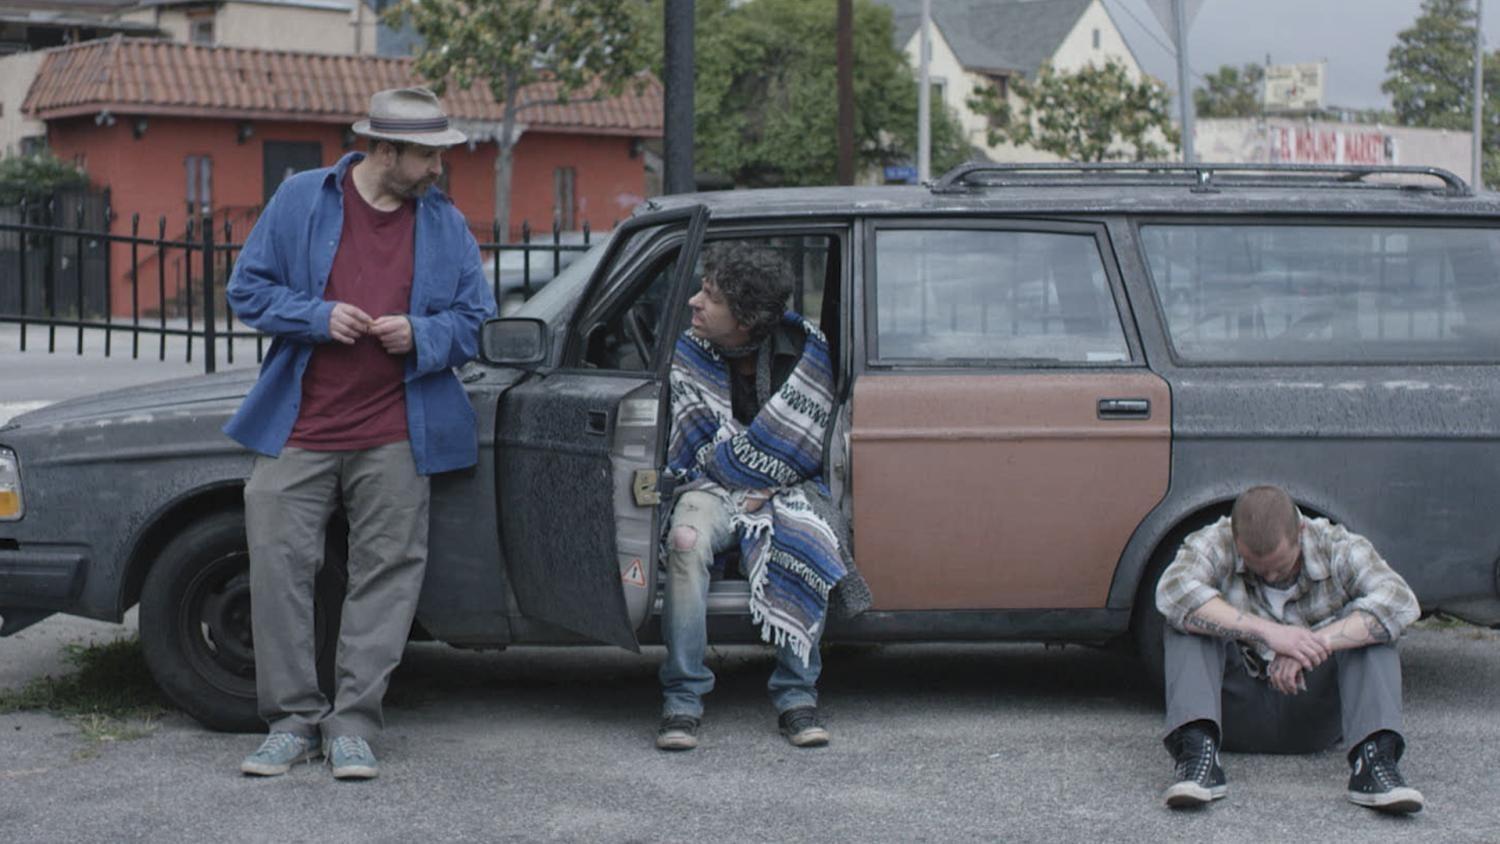 Tommy Swerdlow as Tommy, TJ Bowen as TJ and Blake Heron as Blake chill in the car in “A Thousand Junkies.”